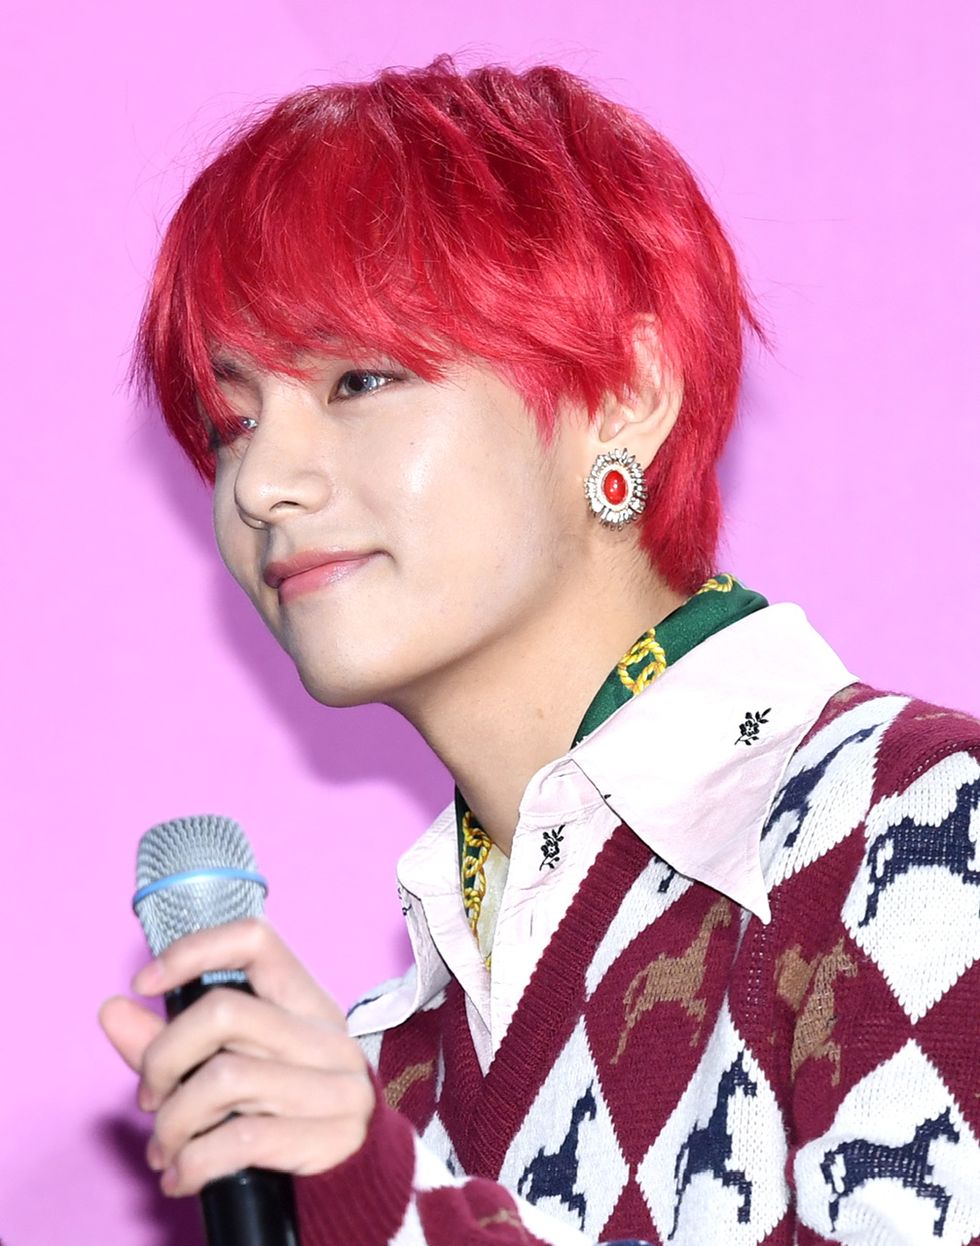 bts v attends the red carpet event of the 'melon music awards 2018' at gocheok skydome on december1st in seoul, south korea photoosen